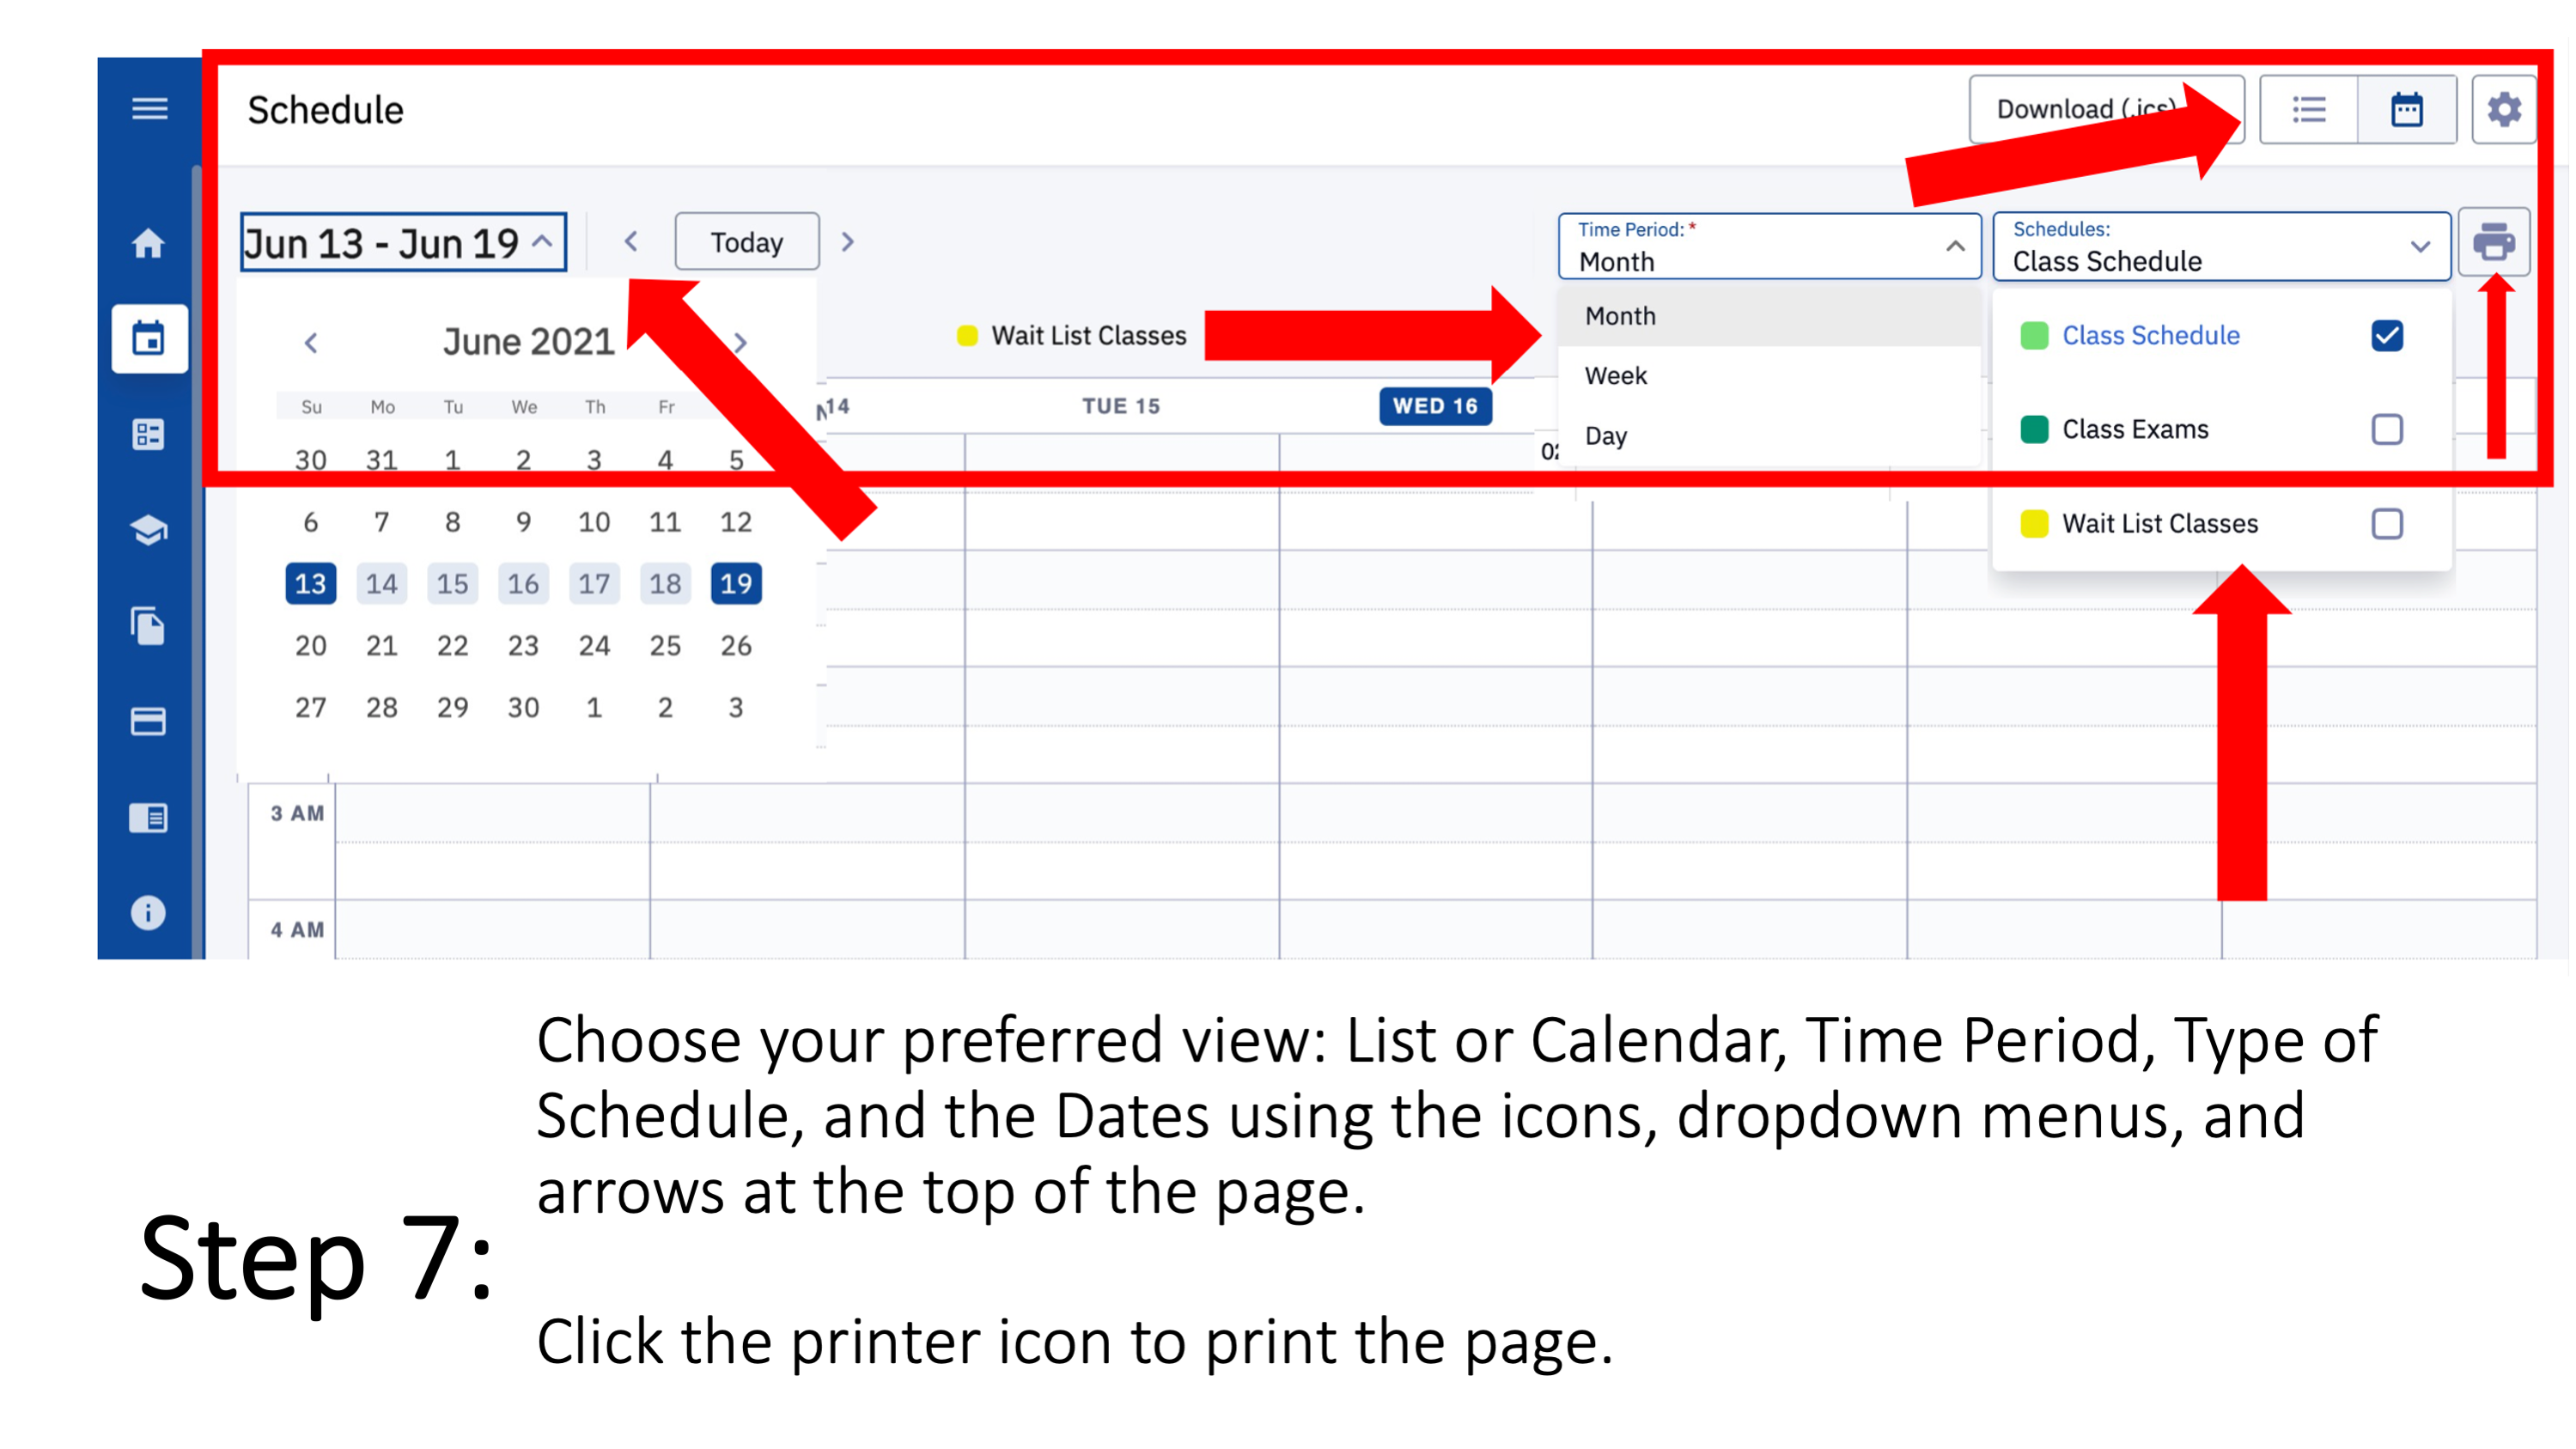 Step 7: Choose your preferred view: List or Calendar, Time Period, Type of Schedule, and the Dates using the icons, dropdown menus, and arrows at the top of the page.